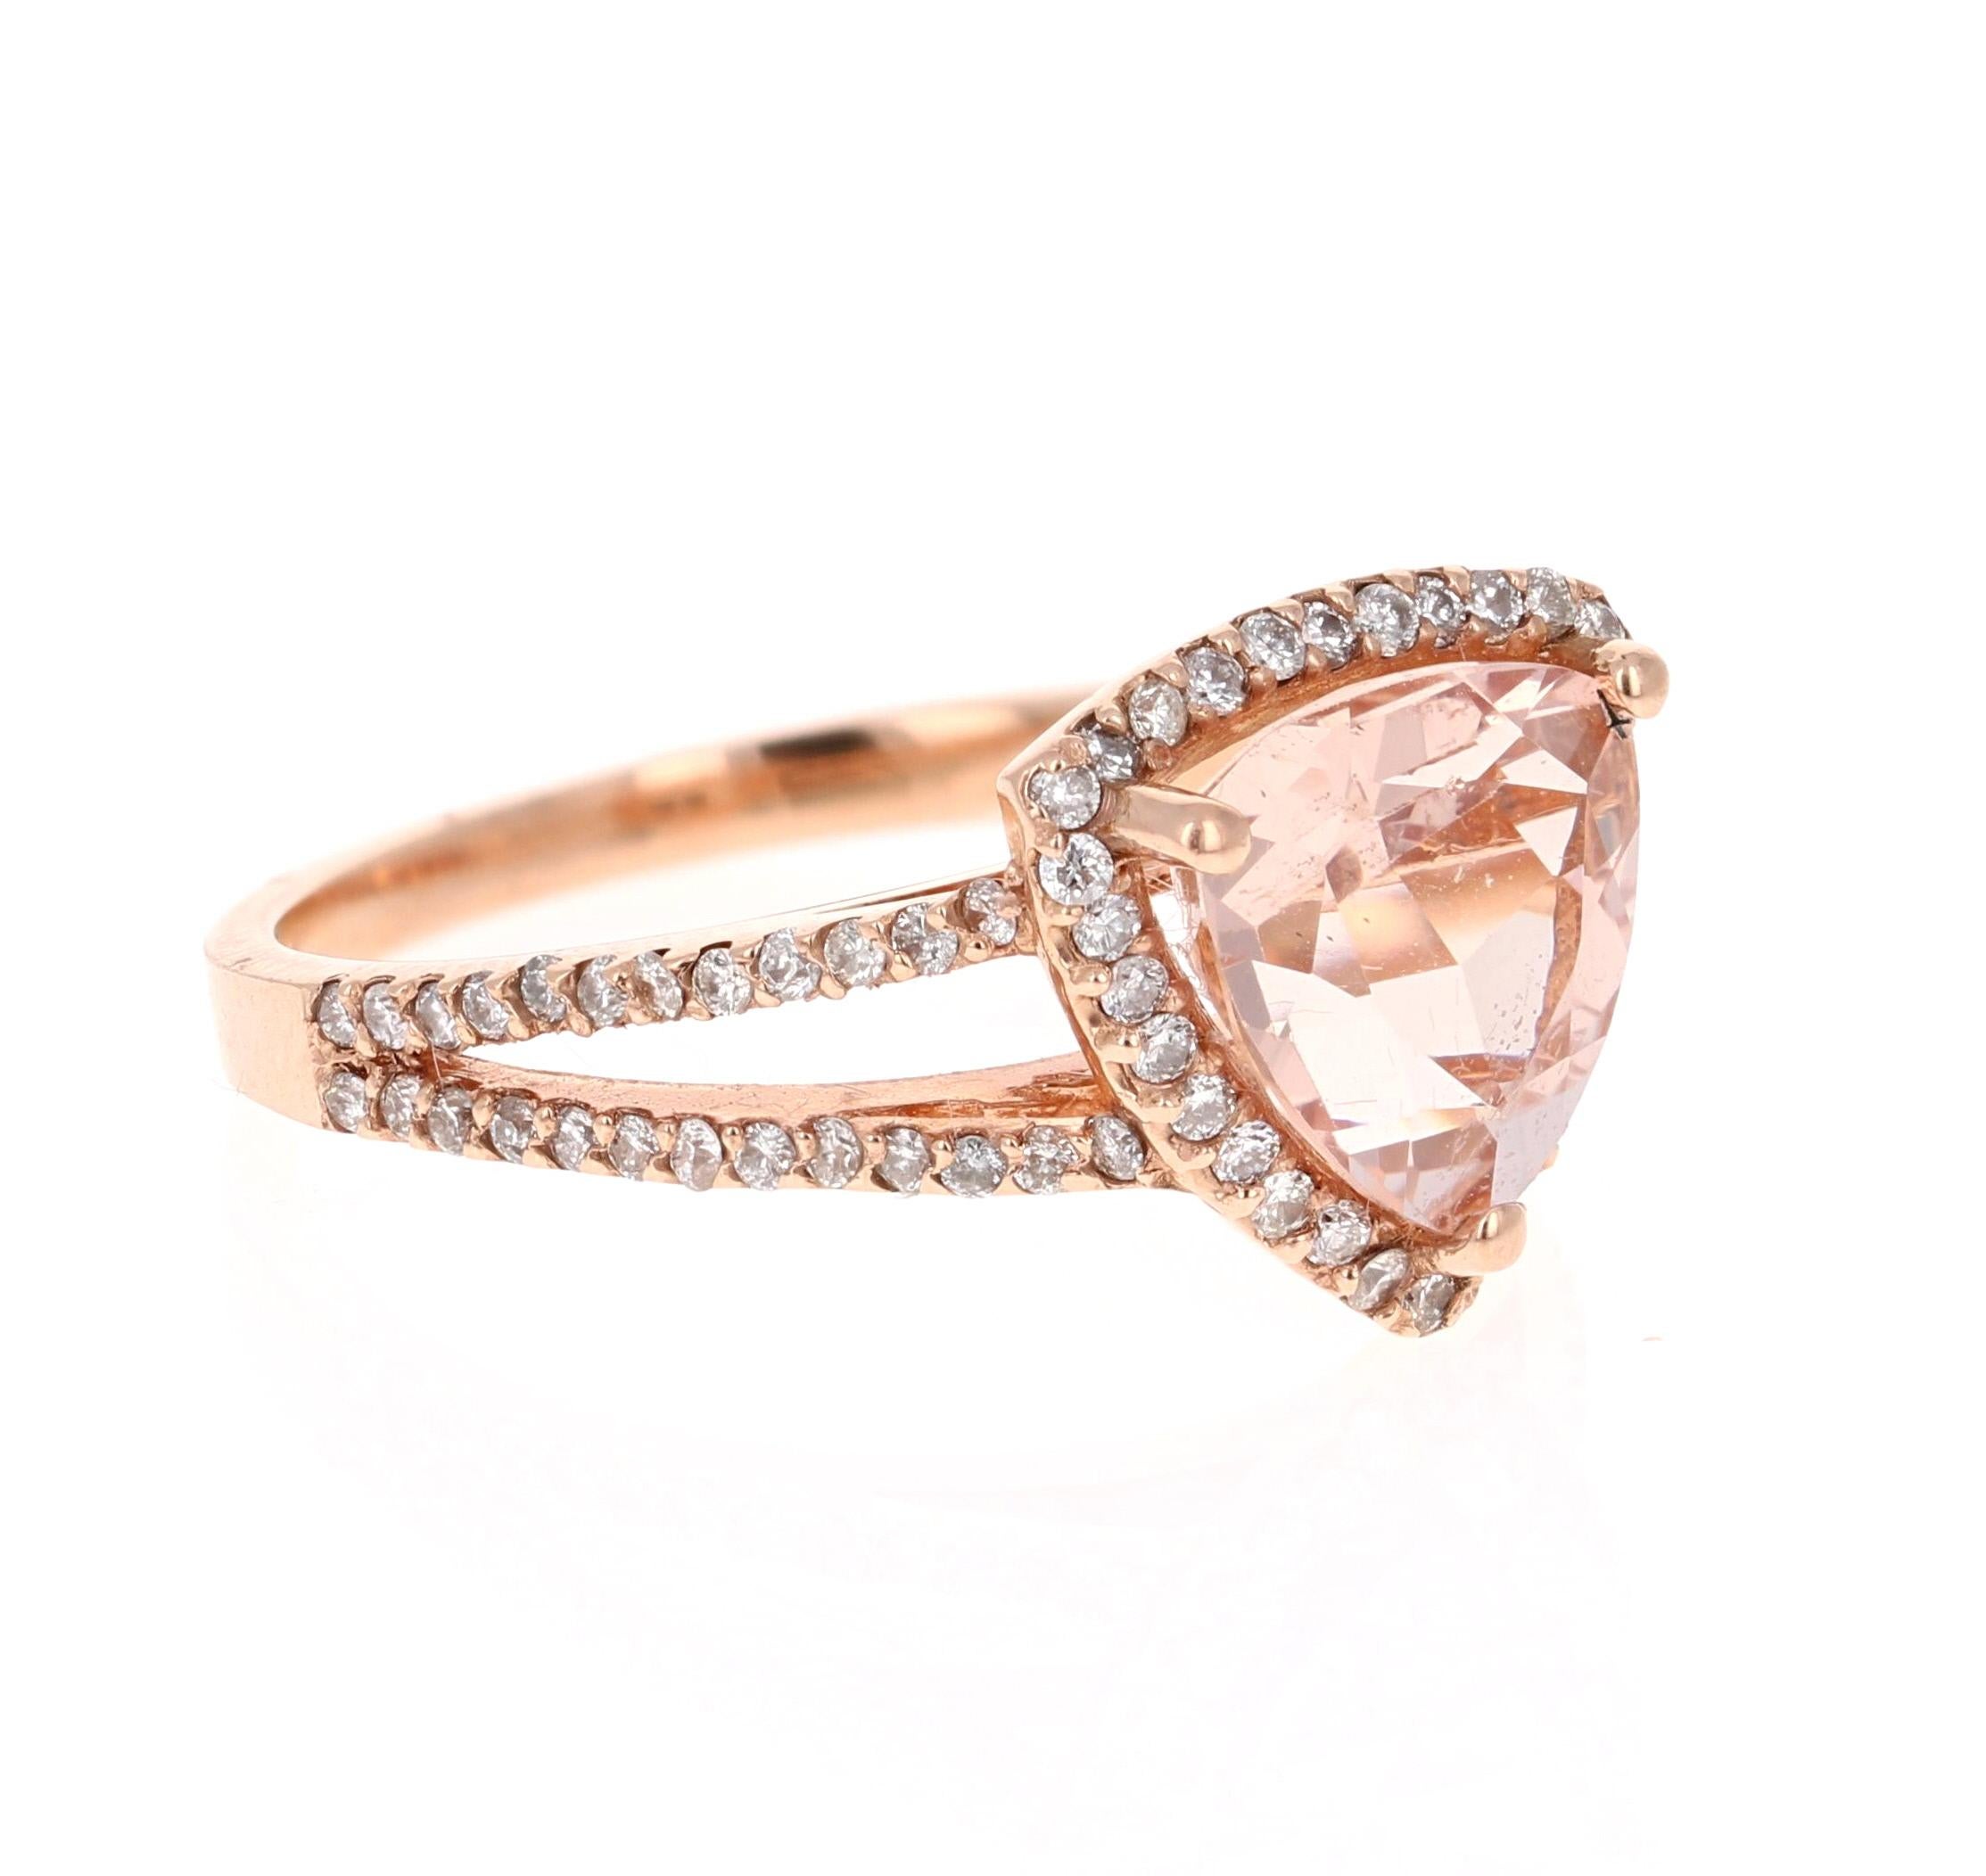 This Morganite ring has a 2.17 Carat Trillion Cut Morganite and is surrounded by 80 Round Cut Diamonds that weigh 0.42 Carats. The total carat weight of the ring is 2.59 Carats. The clarity and color of the natural diamonds are SI1-H. 

It is